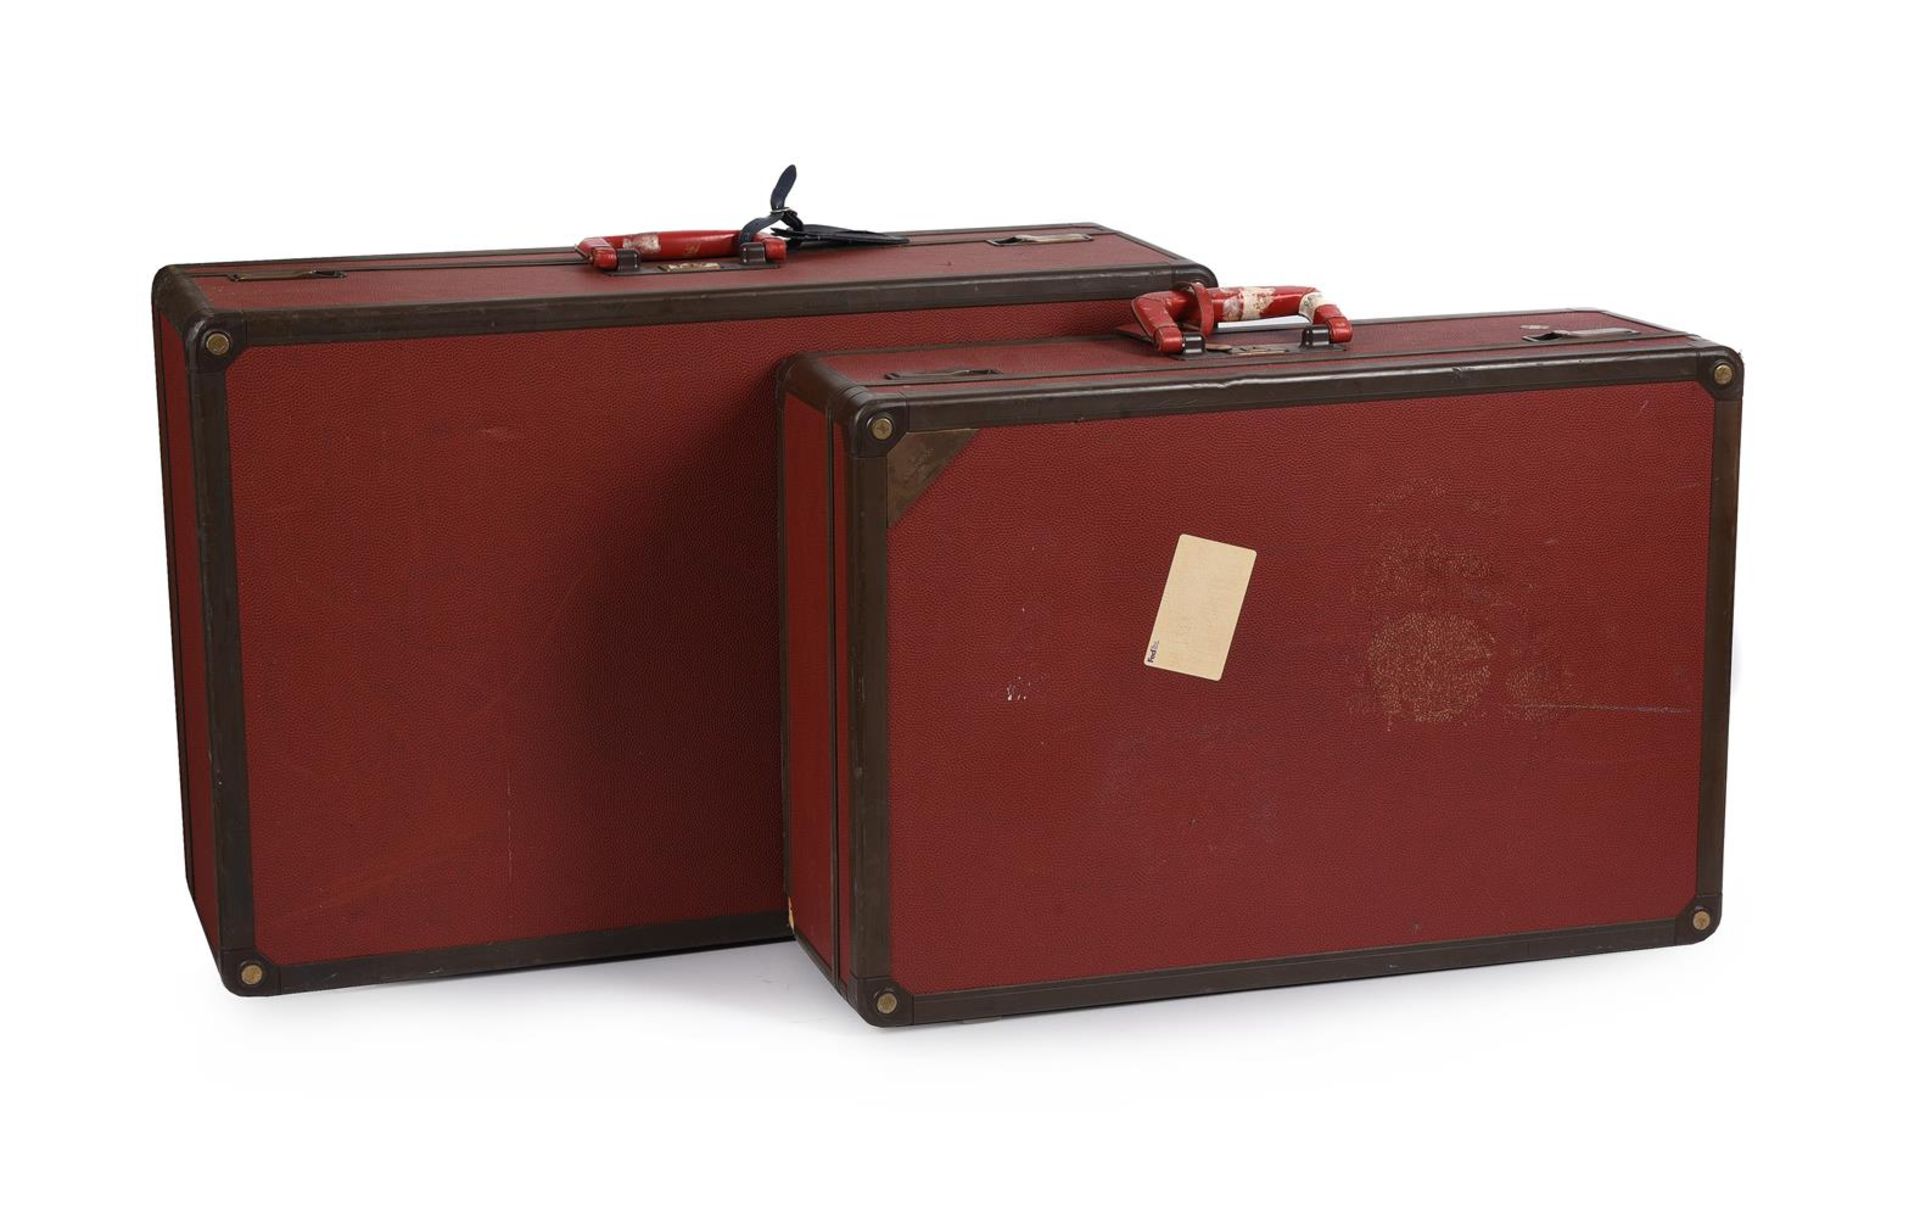 LOUIS VUITTON, TWO RED COATED CANVAS HARD SUITCASES - Image 6 of 6